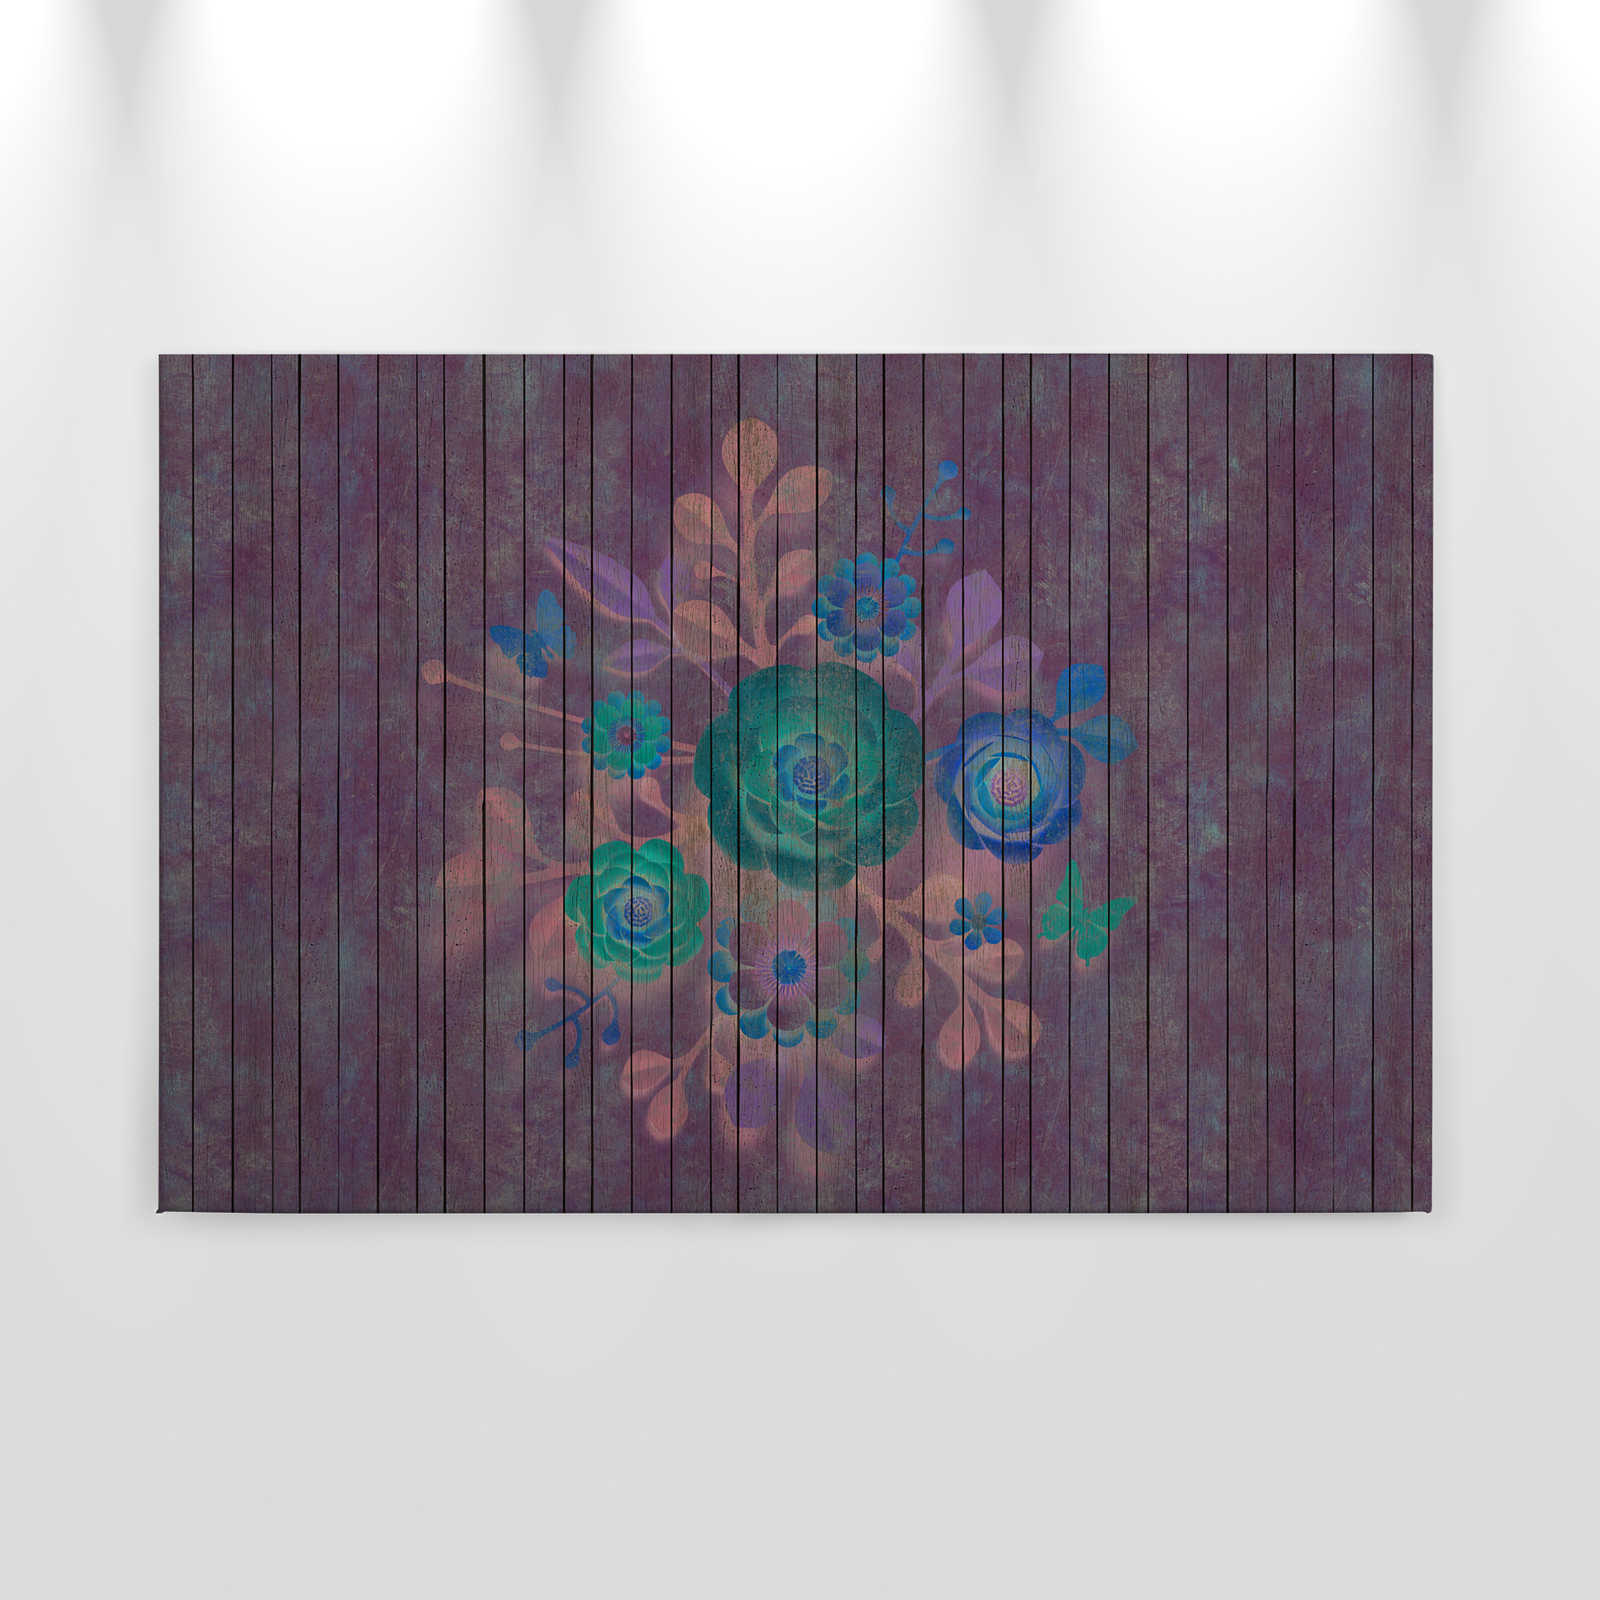             Spray bouquet 1 - Canvas painting with flowers on board wall - Wooden panels wide - 0.90 m x 0.60 m
        